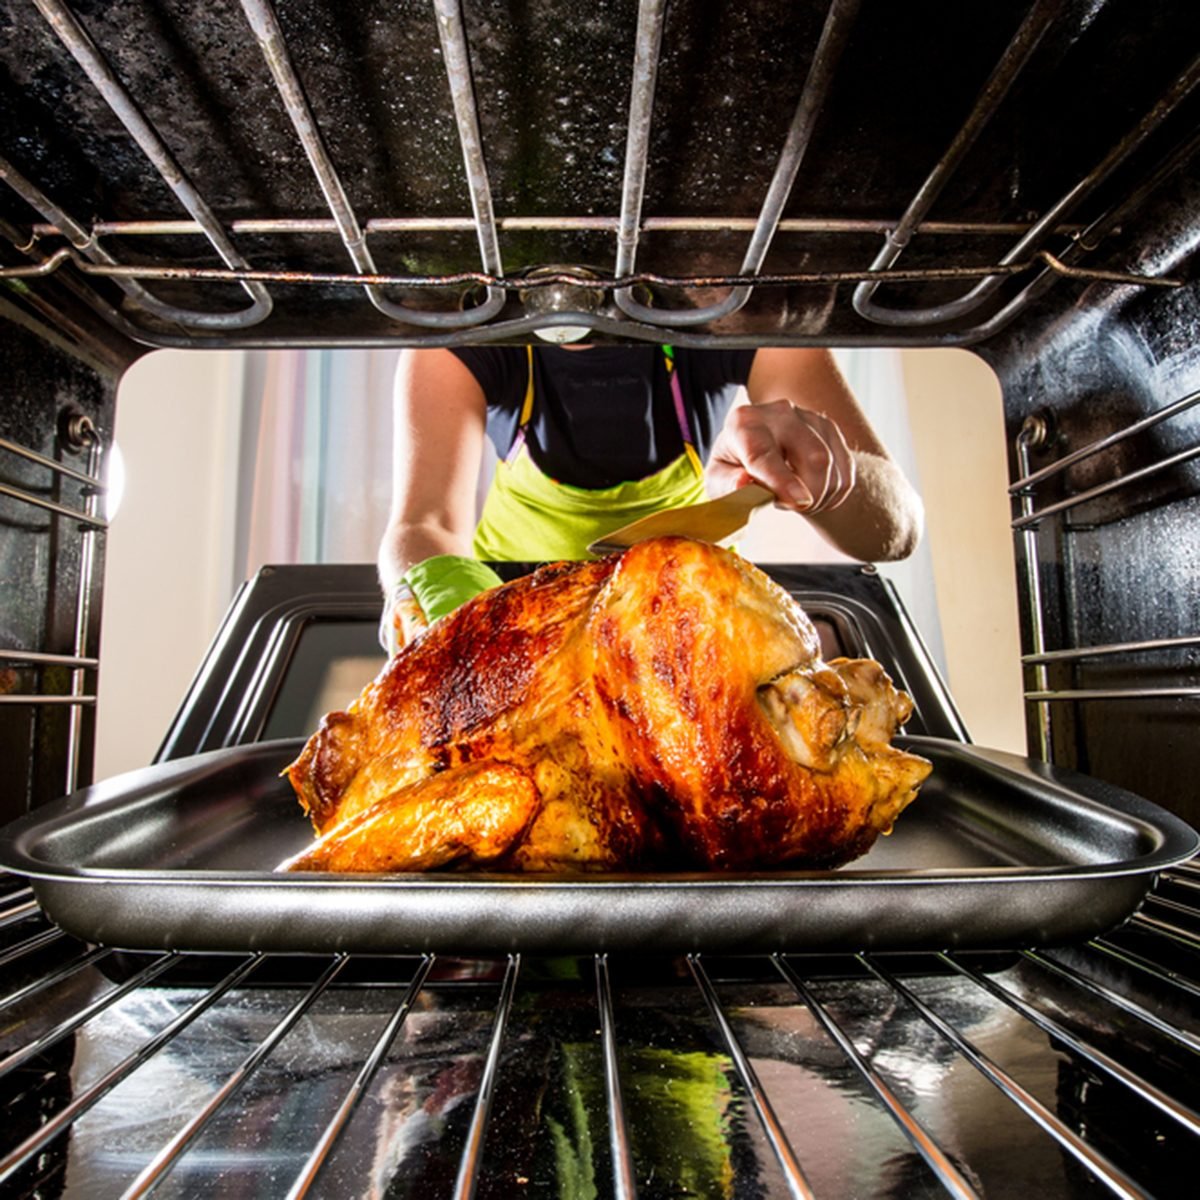 10 Mistakes You're Probably Making When Cooking a Turkey